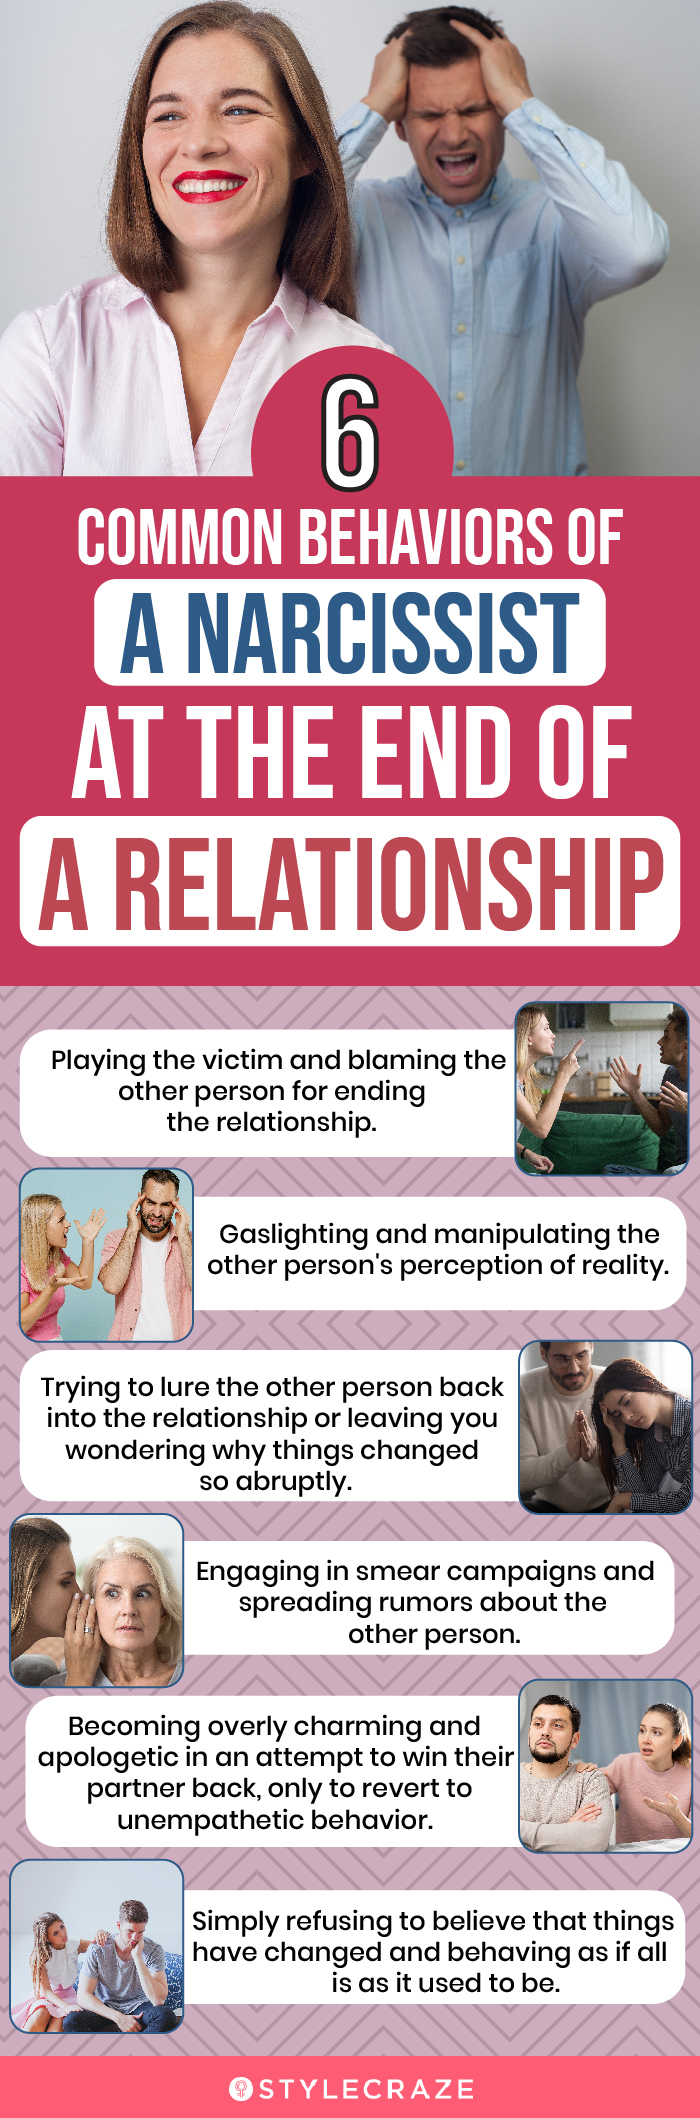 6 common behaviors of a narcissist at the end of a relationship(infographic)